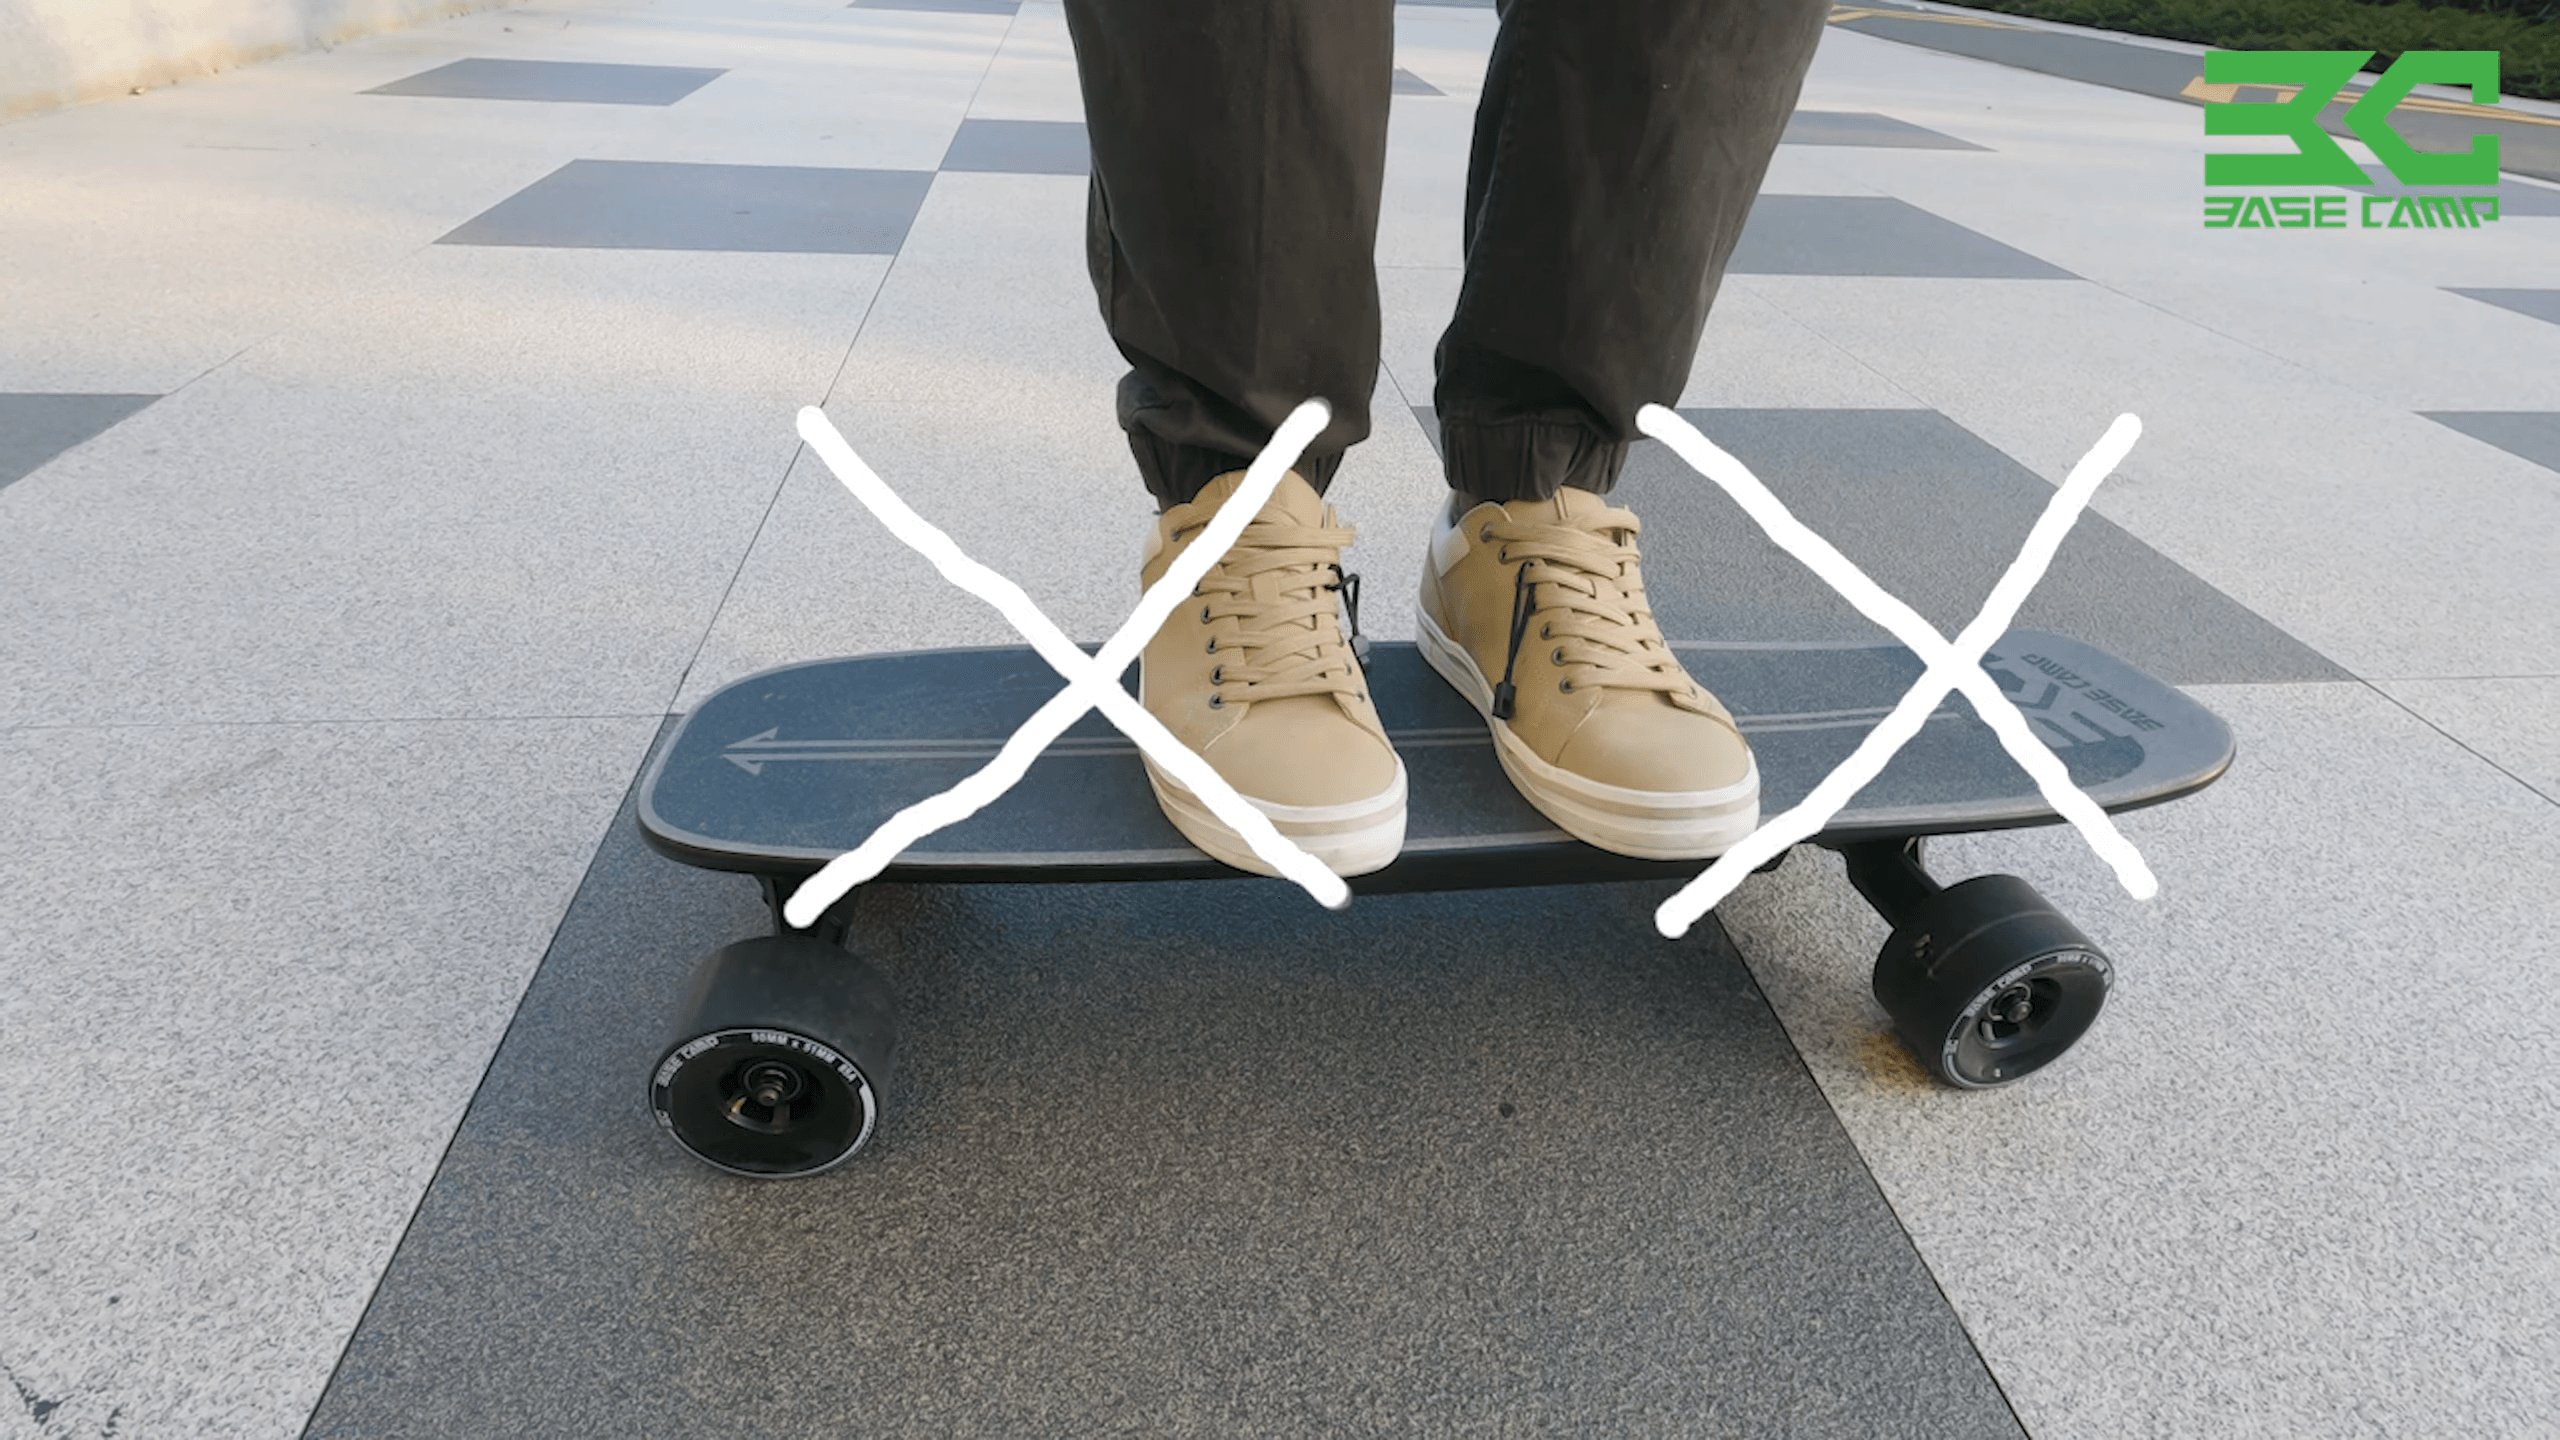 Electric Skateboard Mistakes that you should avoid